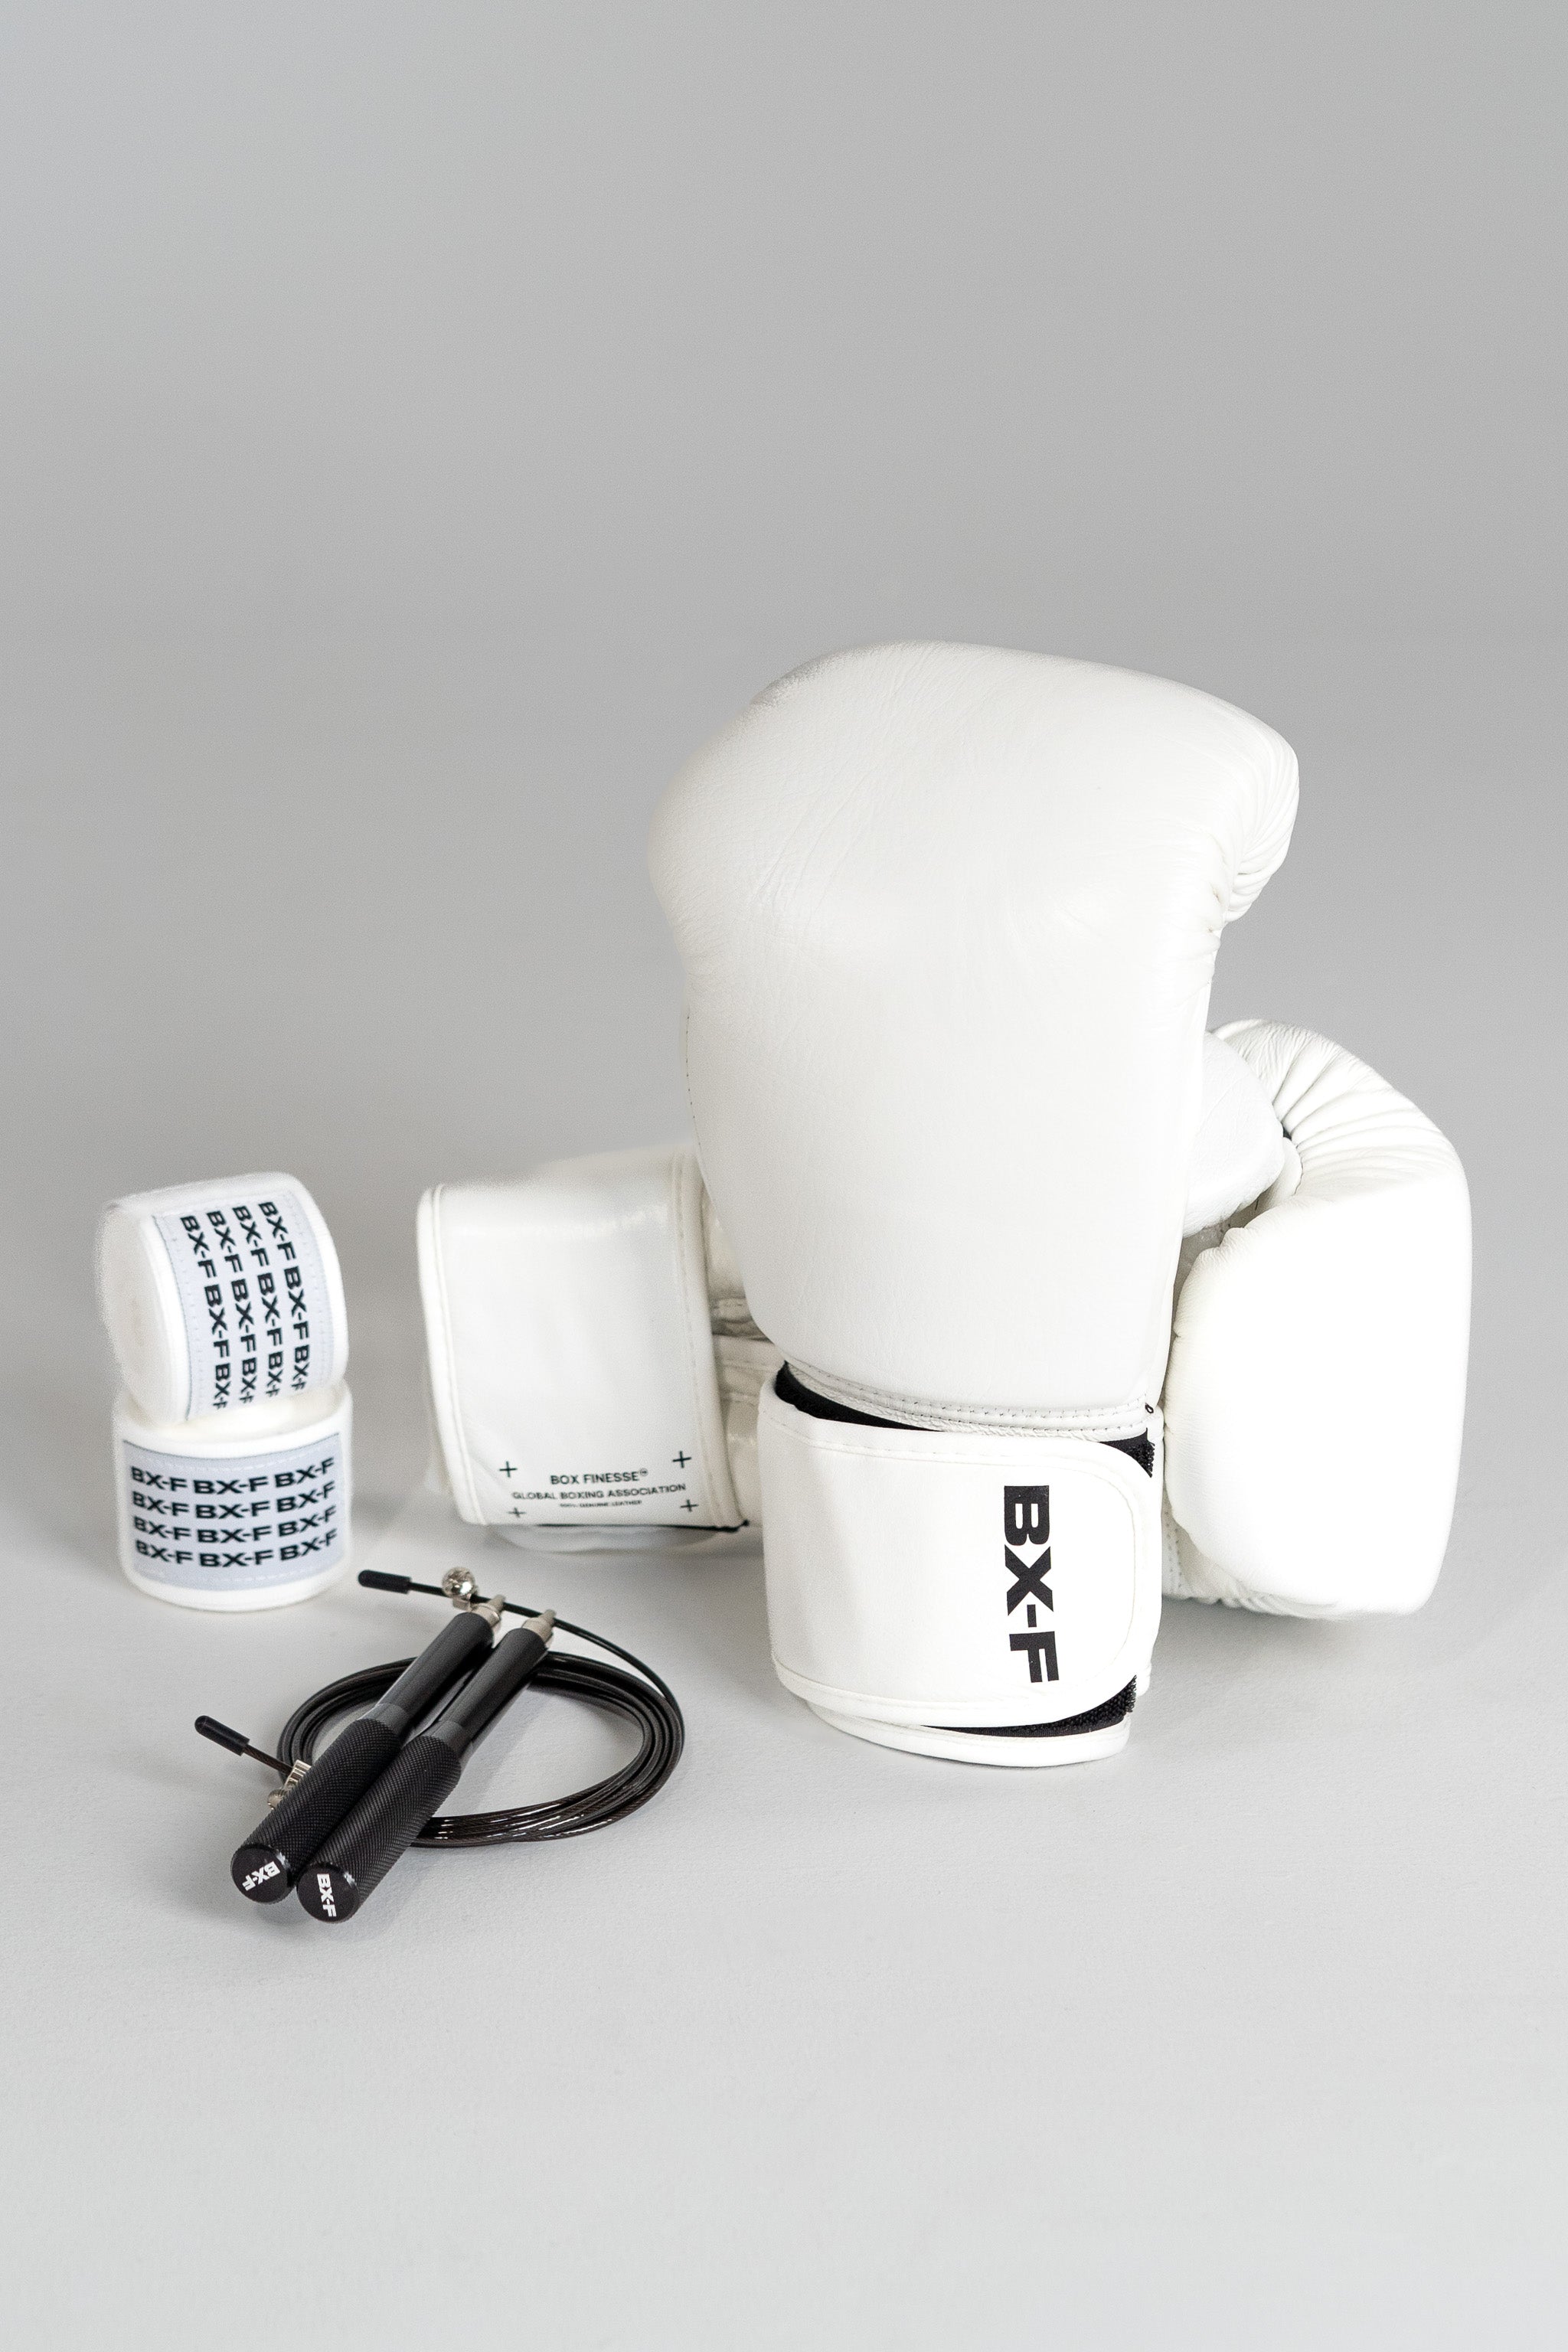 Box Finesse - Training with The Butterfly reflex boxing bag